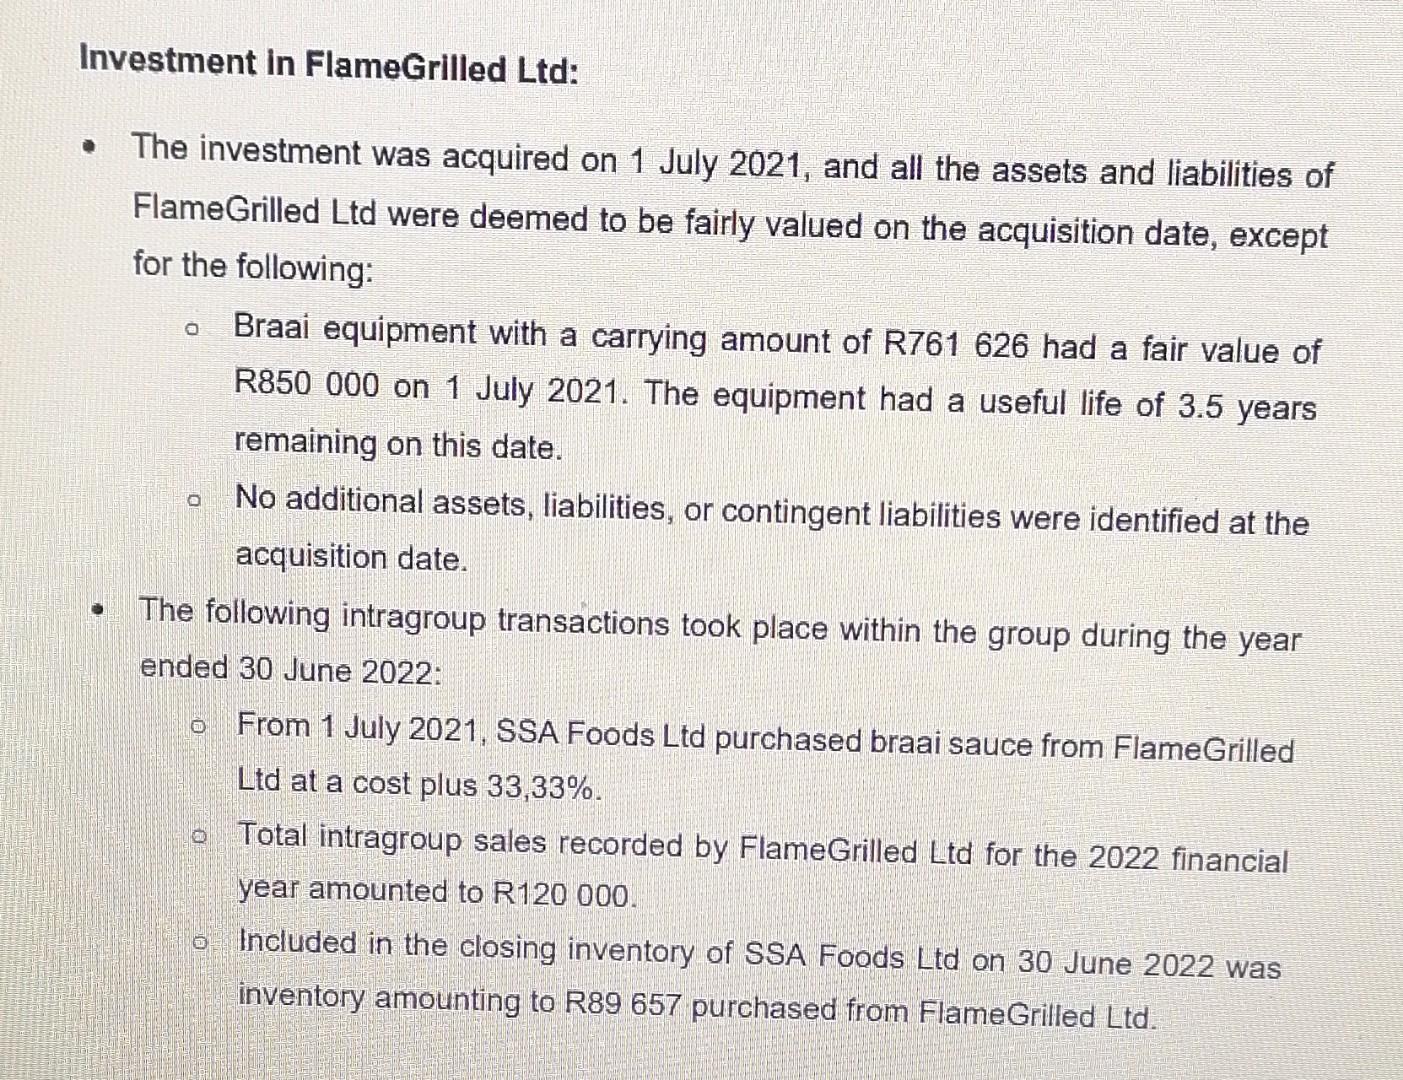 - The investment was acquired on 1 July 2021, and all the assets and liabilities of FlameGrilled Ltd were deemed to be fairly